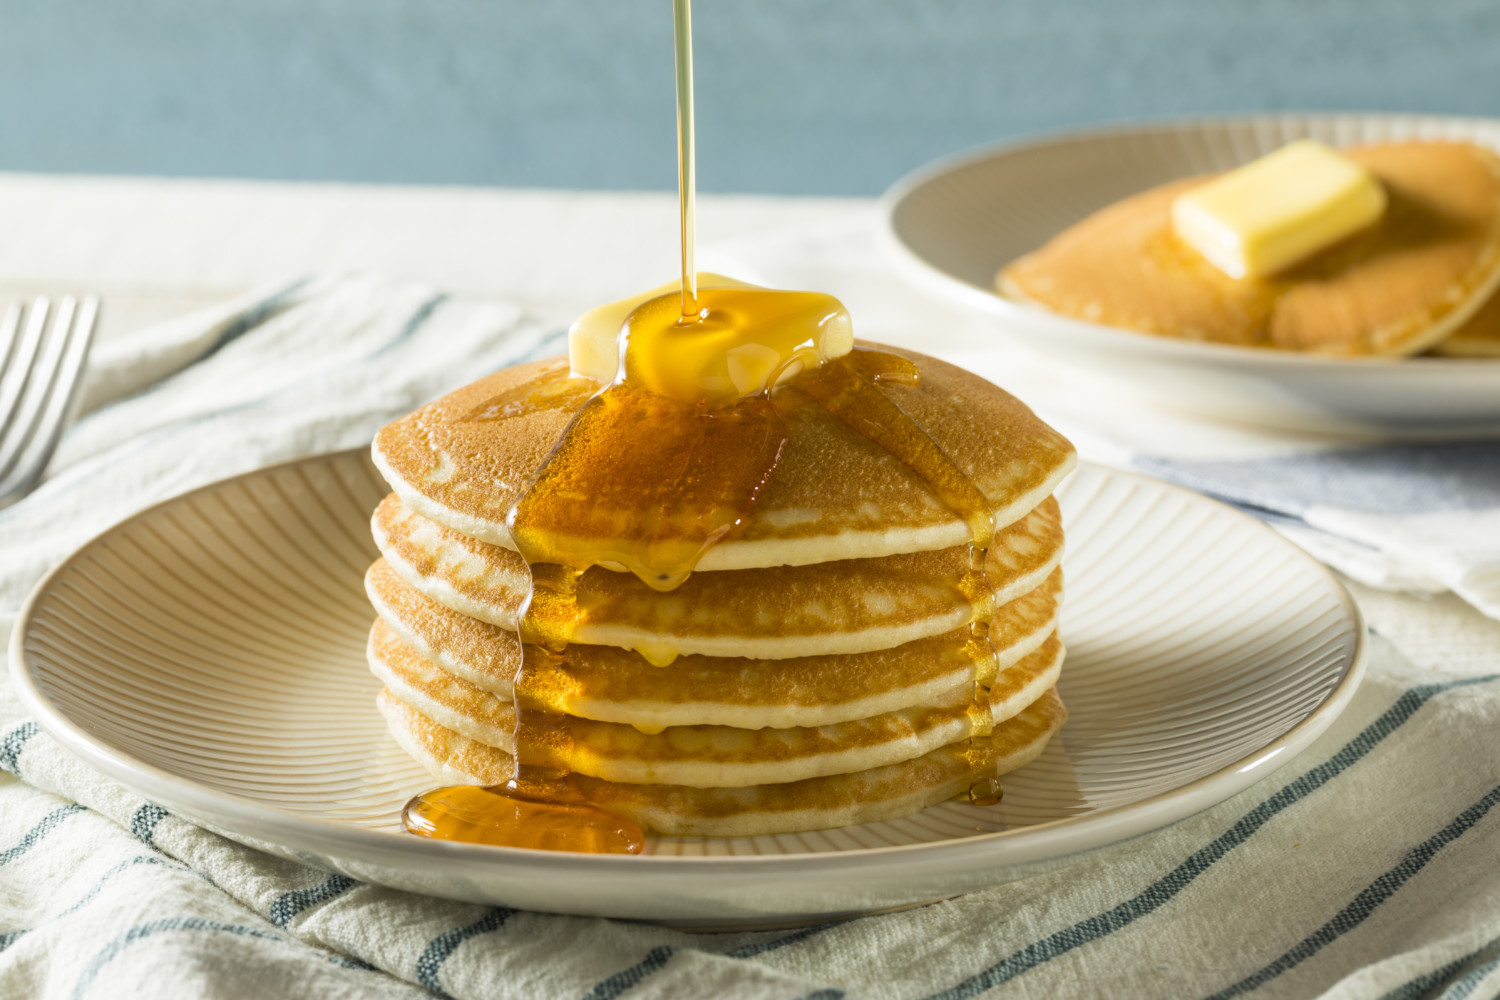 Pancakes with butter and syrup